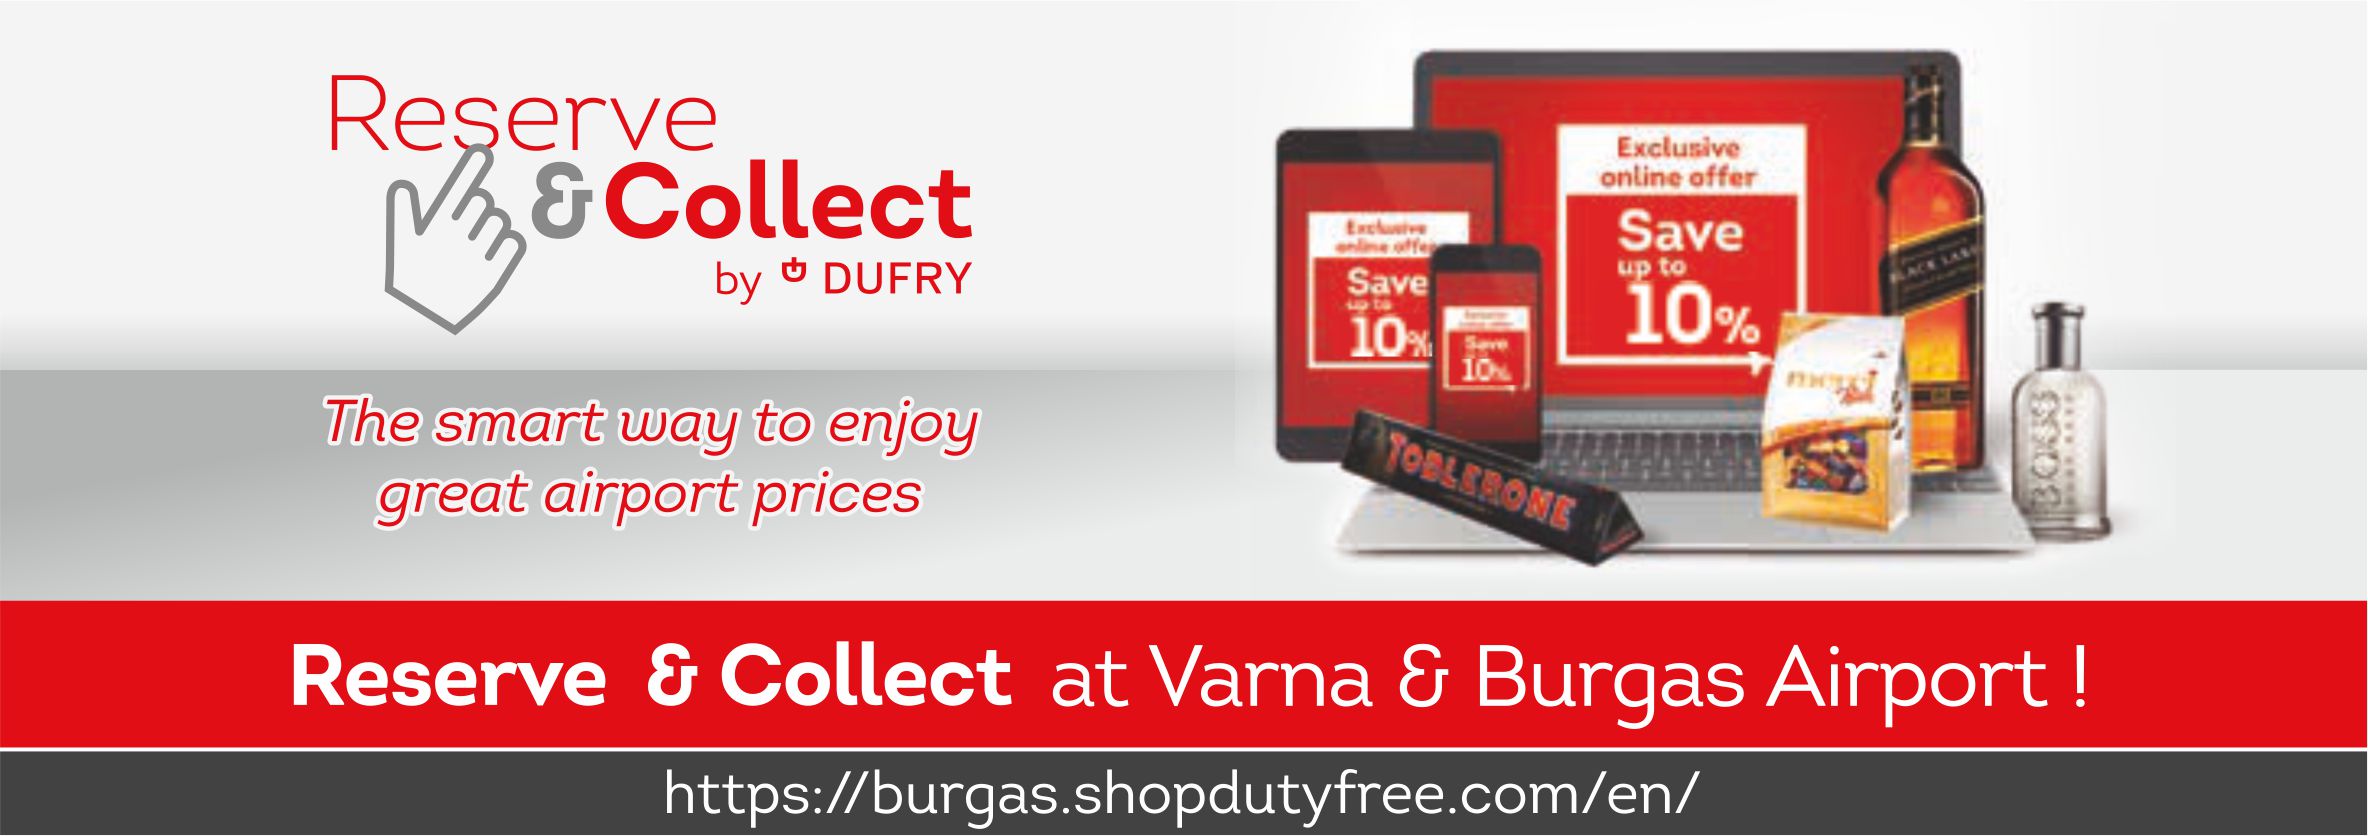 Reserve & Collect by Dufry